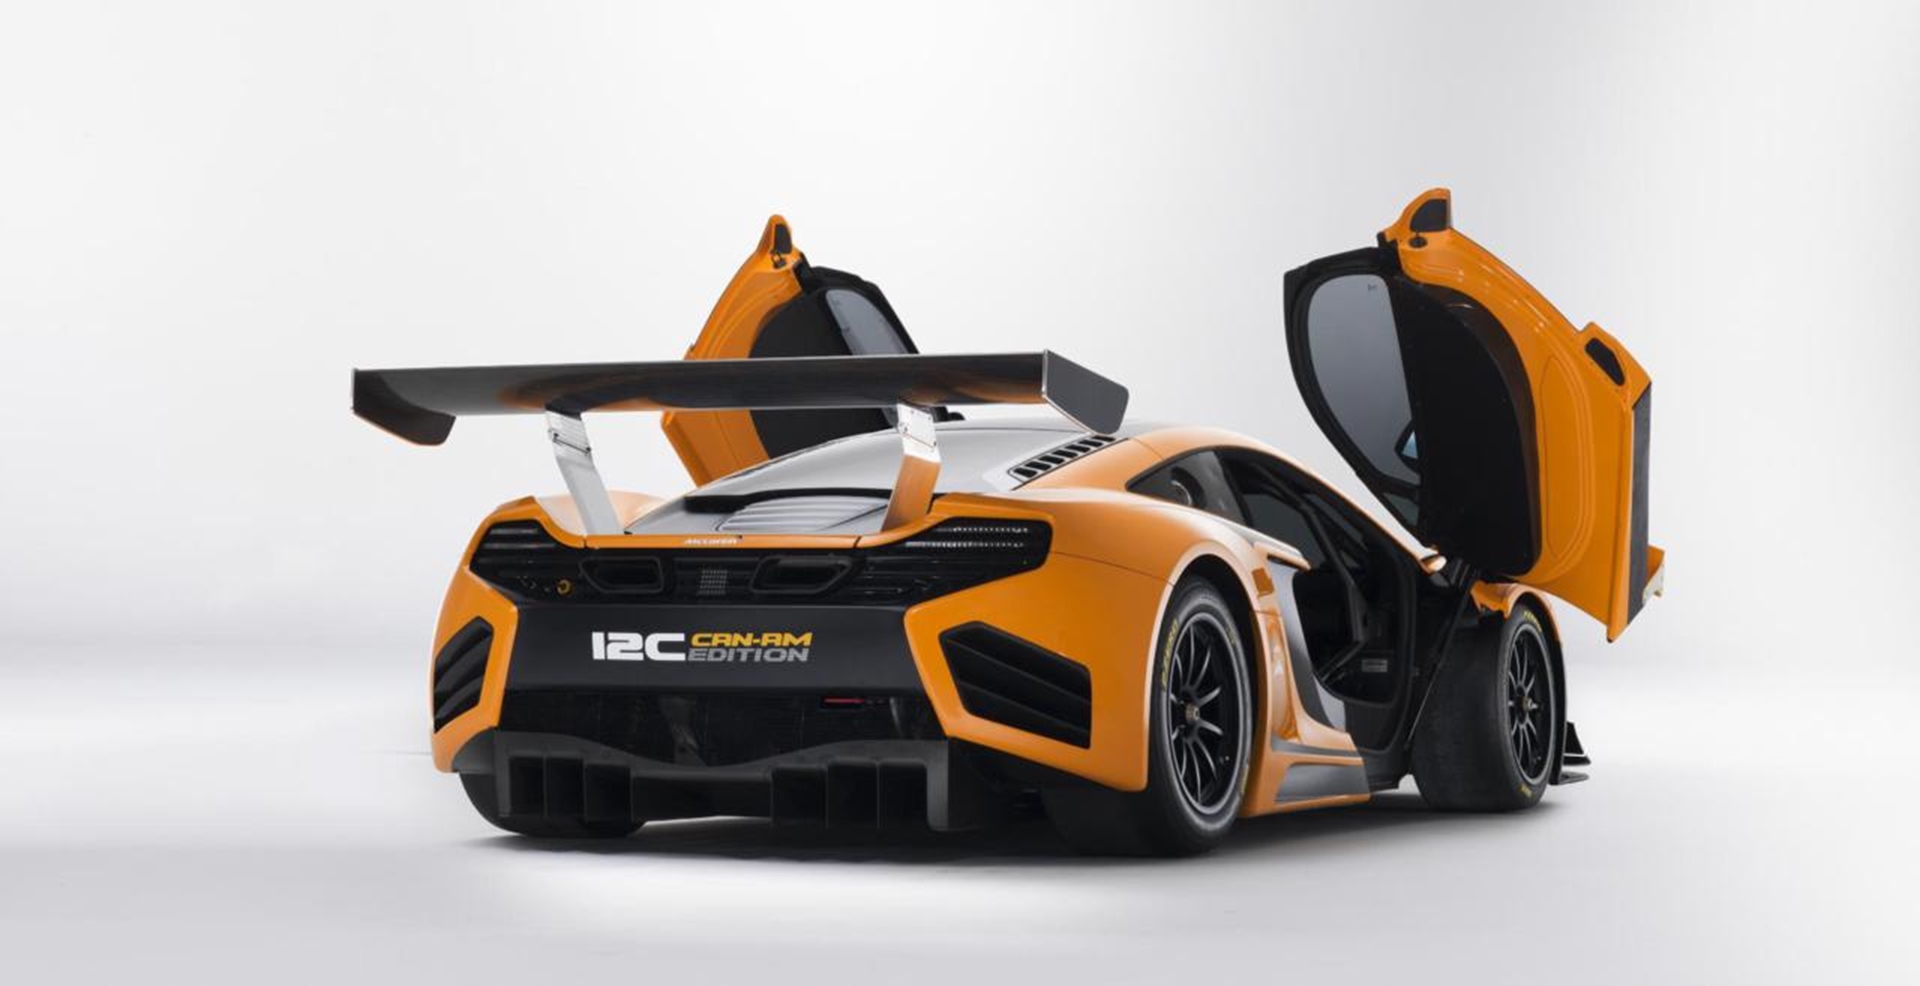 McLAREN 12C CAN-AM EDITION RACING CONCEPT MAKES DEBUT AT PEBBLE BEACH CONCOURS D’ ELEGANCE WEEKEND